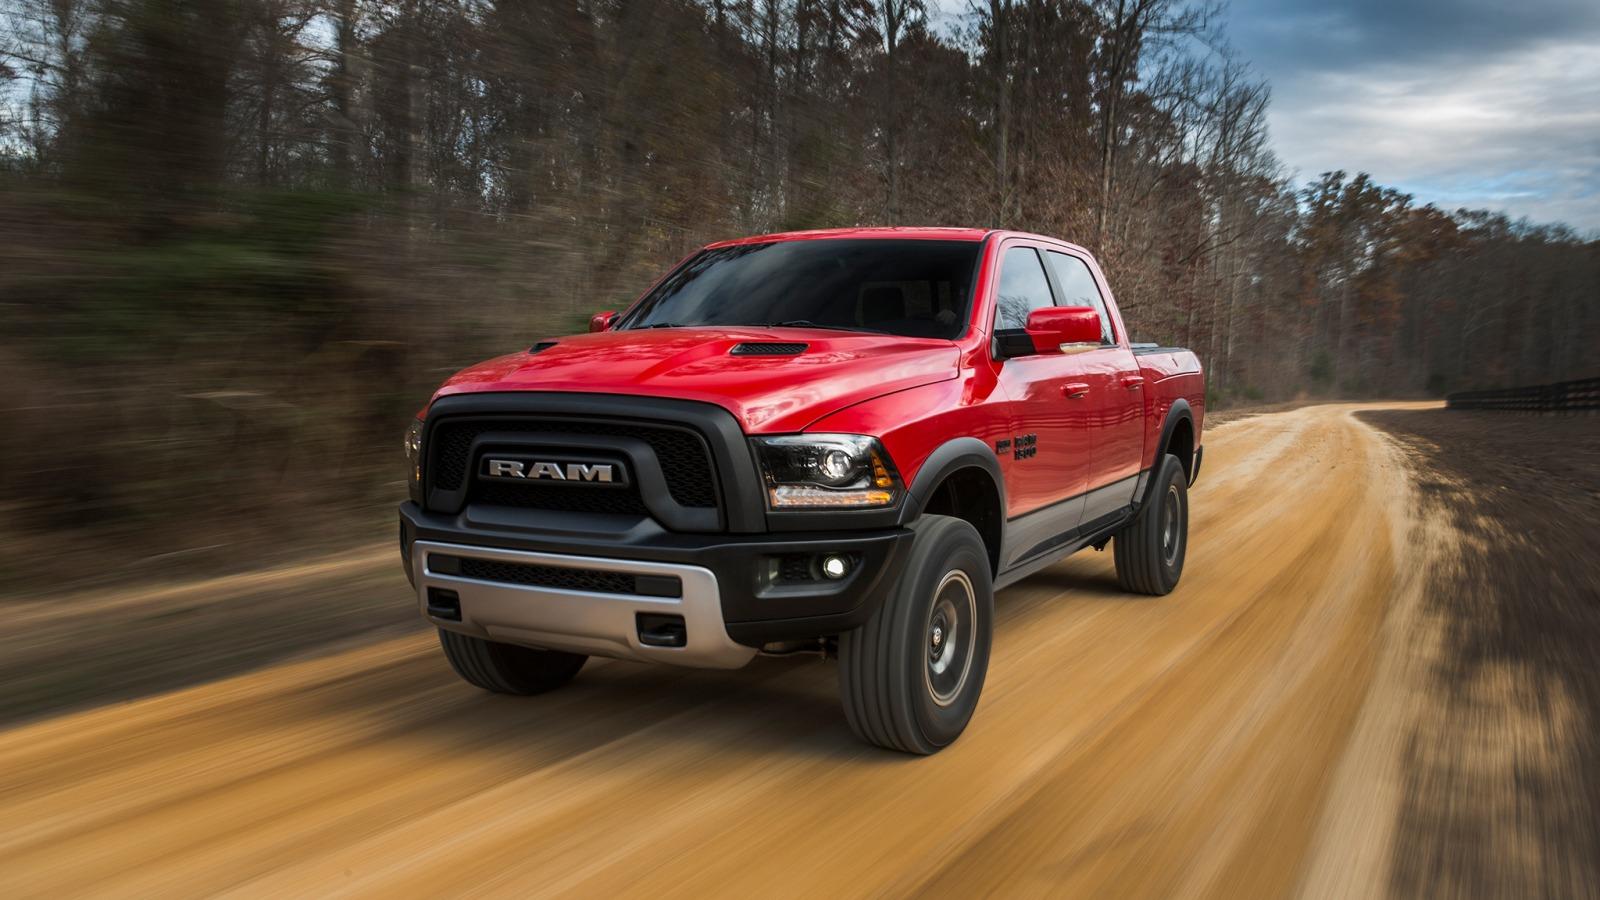 Used 2017 Ram 1500 Review & Ratings